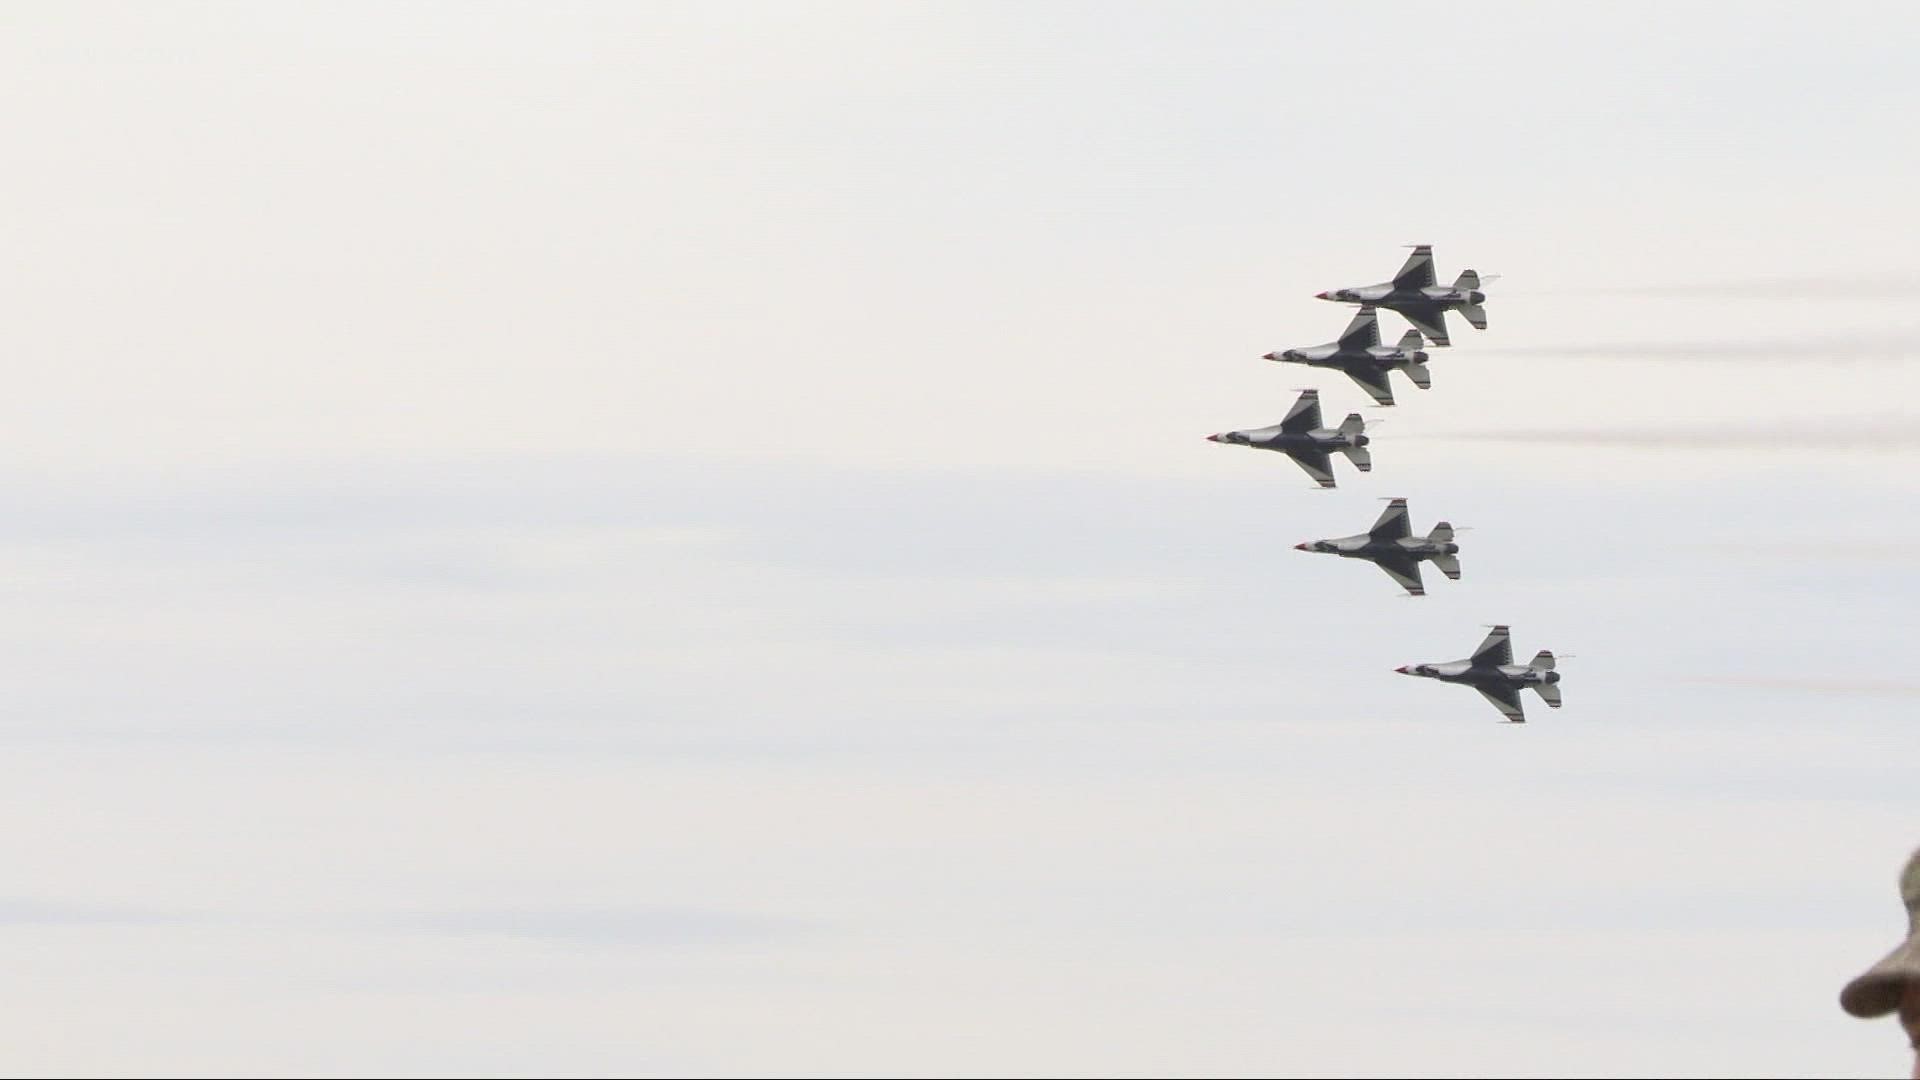 The Air Show is happening at Burke Lakefront Airport. Cleveland Oktoberfest, Akron Pizza Fest, and the Geauga County Fair are also taking place this weekend.